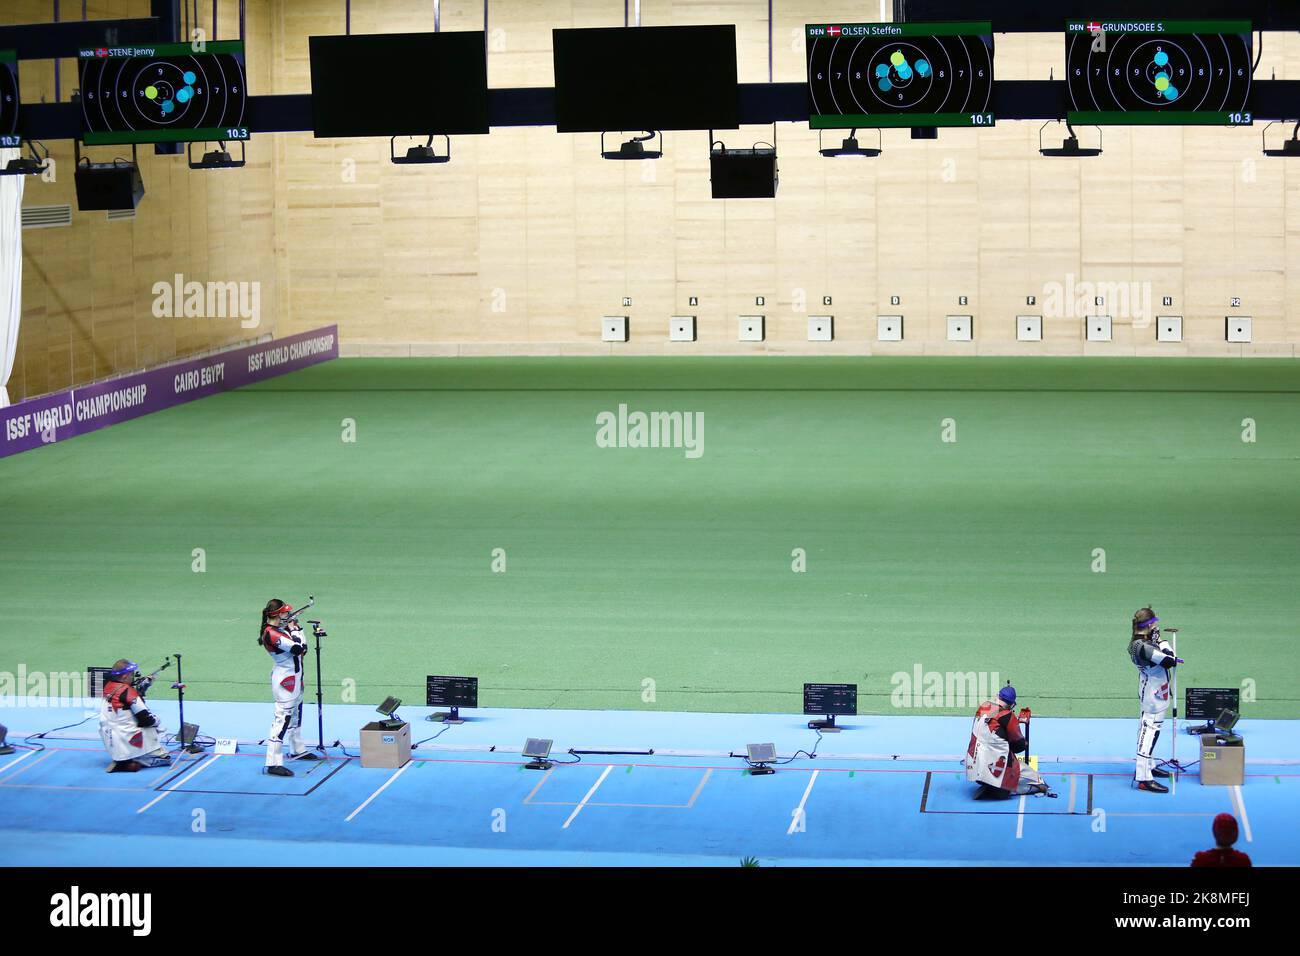 Cairo, Egypt. 24th Oct, 2022. Stephanie Laura Scurrah Grundsoee (1st R)/Steffen Olsen (2nd R) of Denmark and Jenny Stene (2nd L)/Simon Claussen (1st L) of Norway compete during their 50m rifle 3 positions mixed team gold medal match at the ISSF World Championship Rifle/Pistol in Cairo, Egypt, Oct. 24, 2022. Credit: Ahmed Gomaa/Xinhua/Alamy Live News Stock Photo